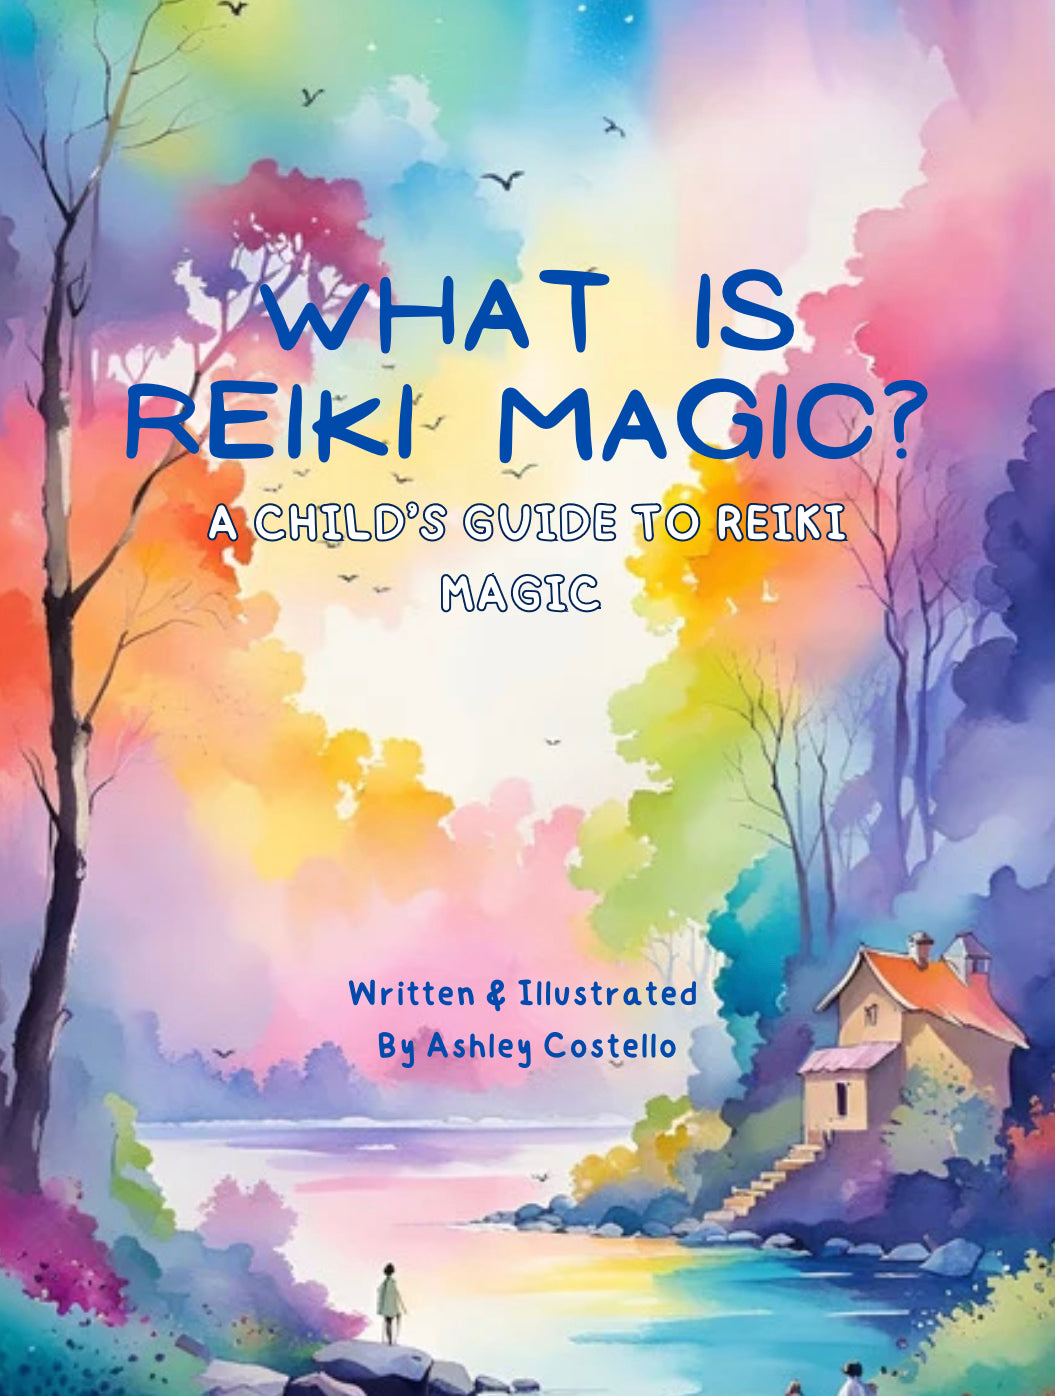 What is Reiki Magic? A Child’s Guide to Reiki Magic